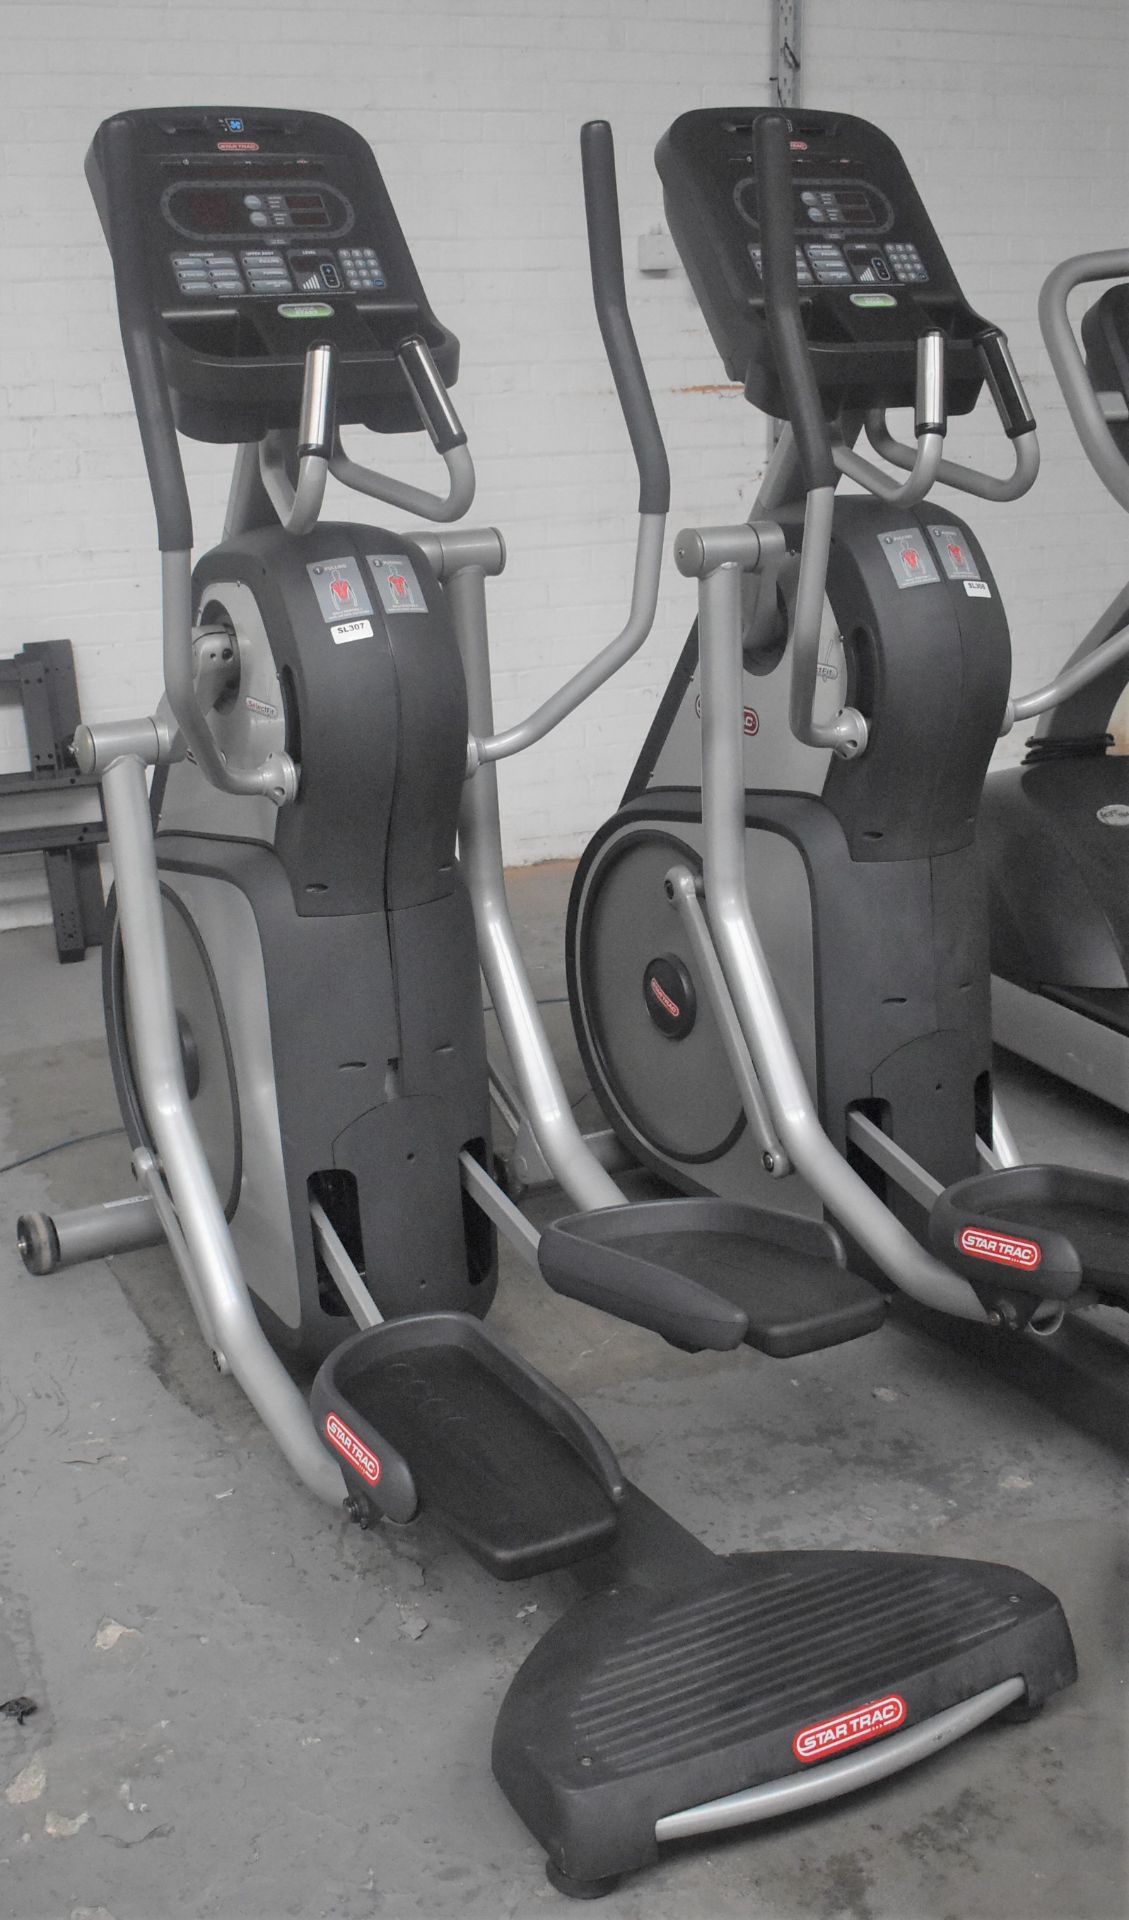 1 x Star Trac Commercial Excercise Elliptical Cross Trainer - CL011 - Ref SL307 GIT -  Location: - Image 4 of 9